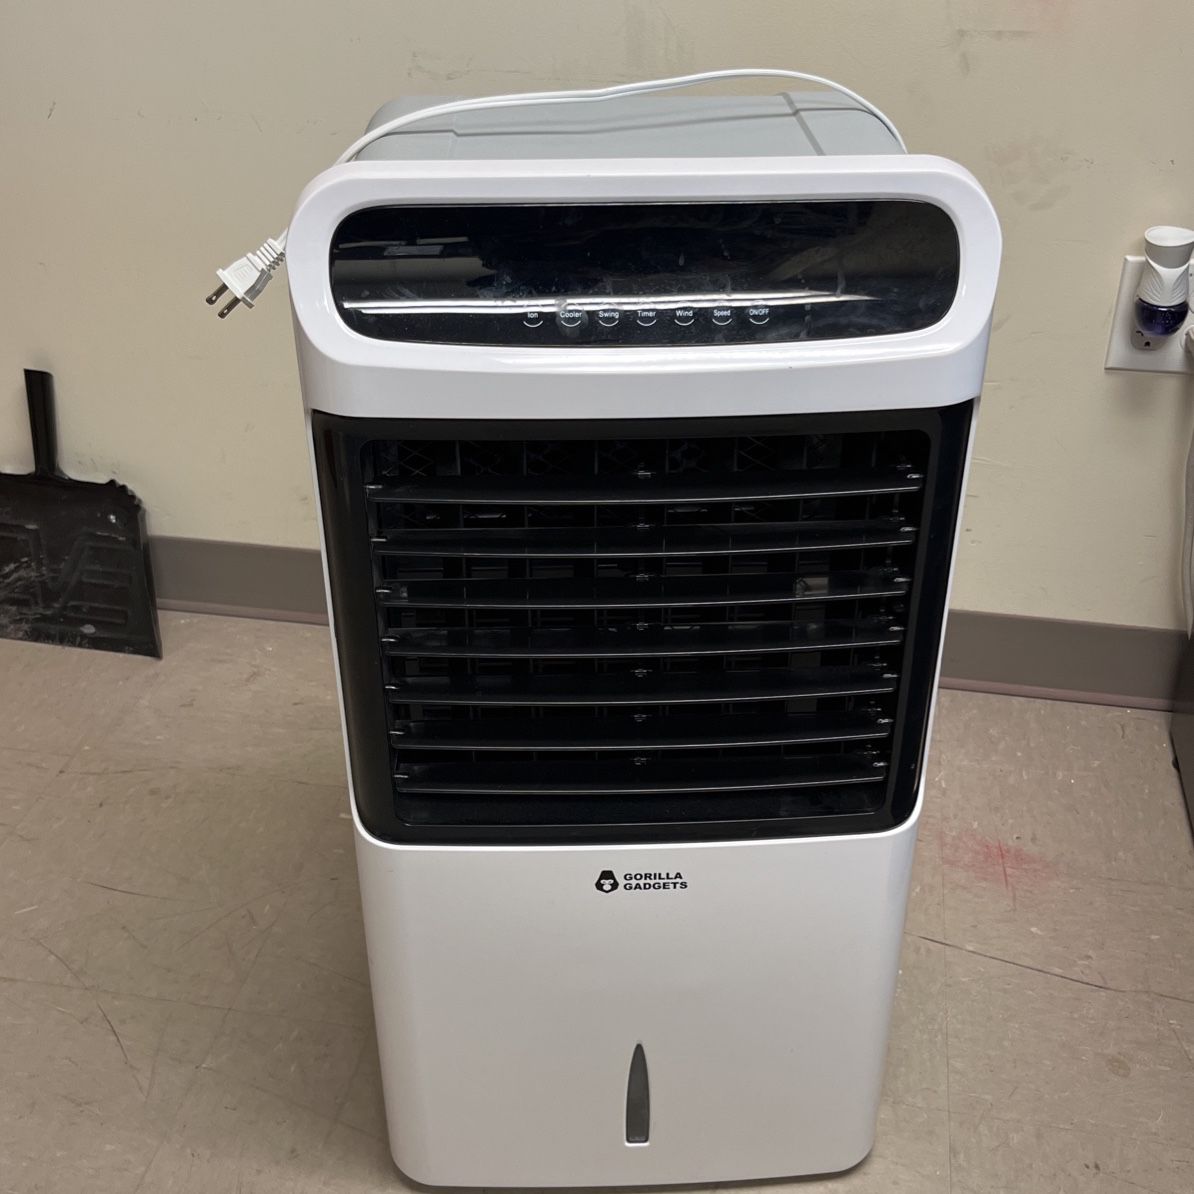 Gorilla Gadgets Air Cooler for Sale in Lakewood, WA - OfferUp